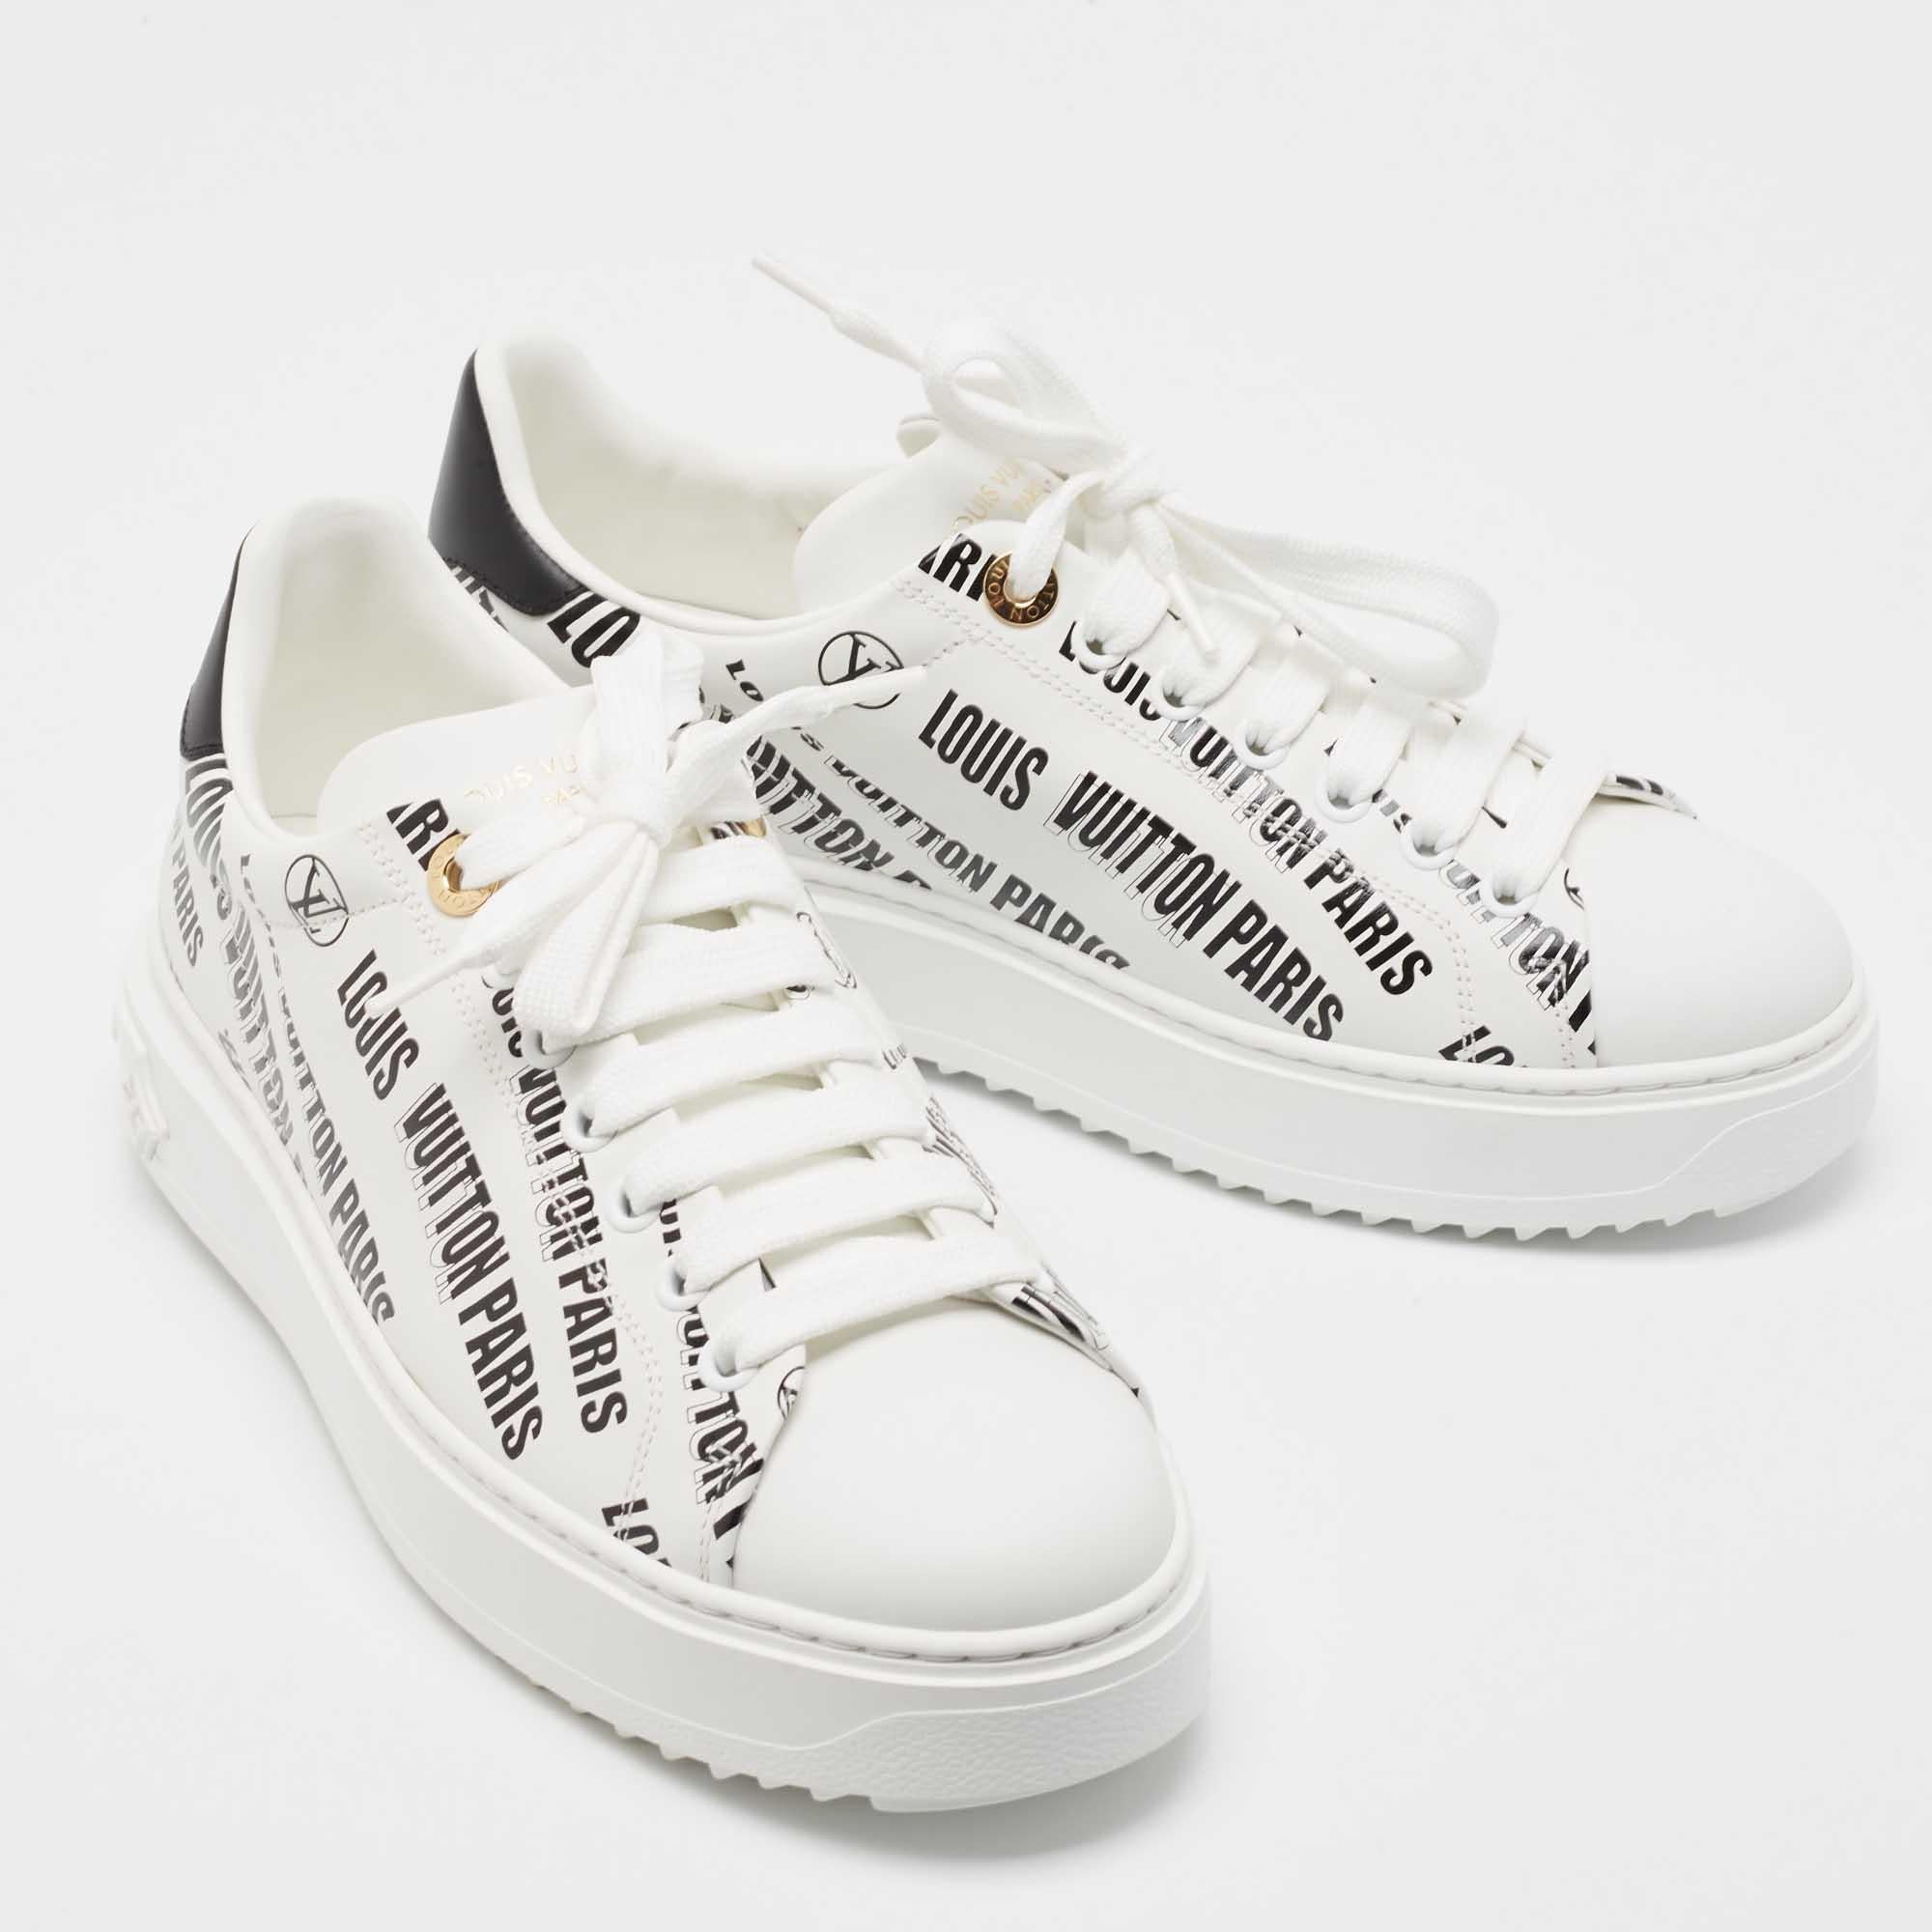 Louis Vuitton White/Black Leather Logo Printed Time Out Sneakers Size 37.5 In Excellent Condition For Sale In Dubai, Al Qouz 2